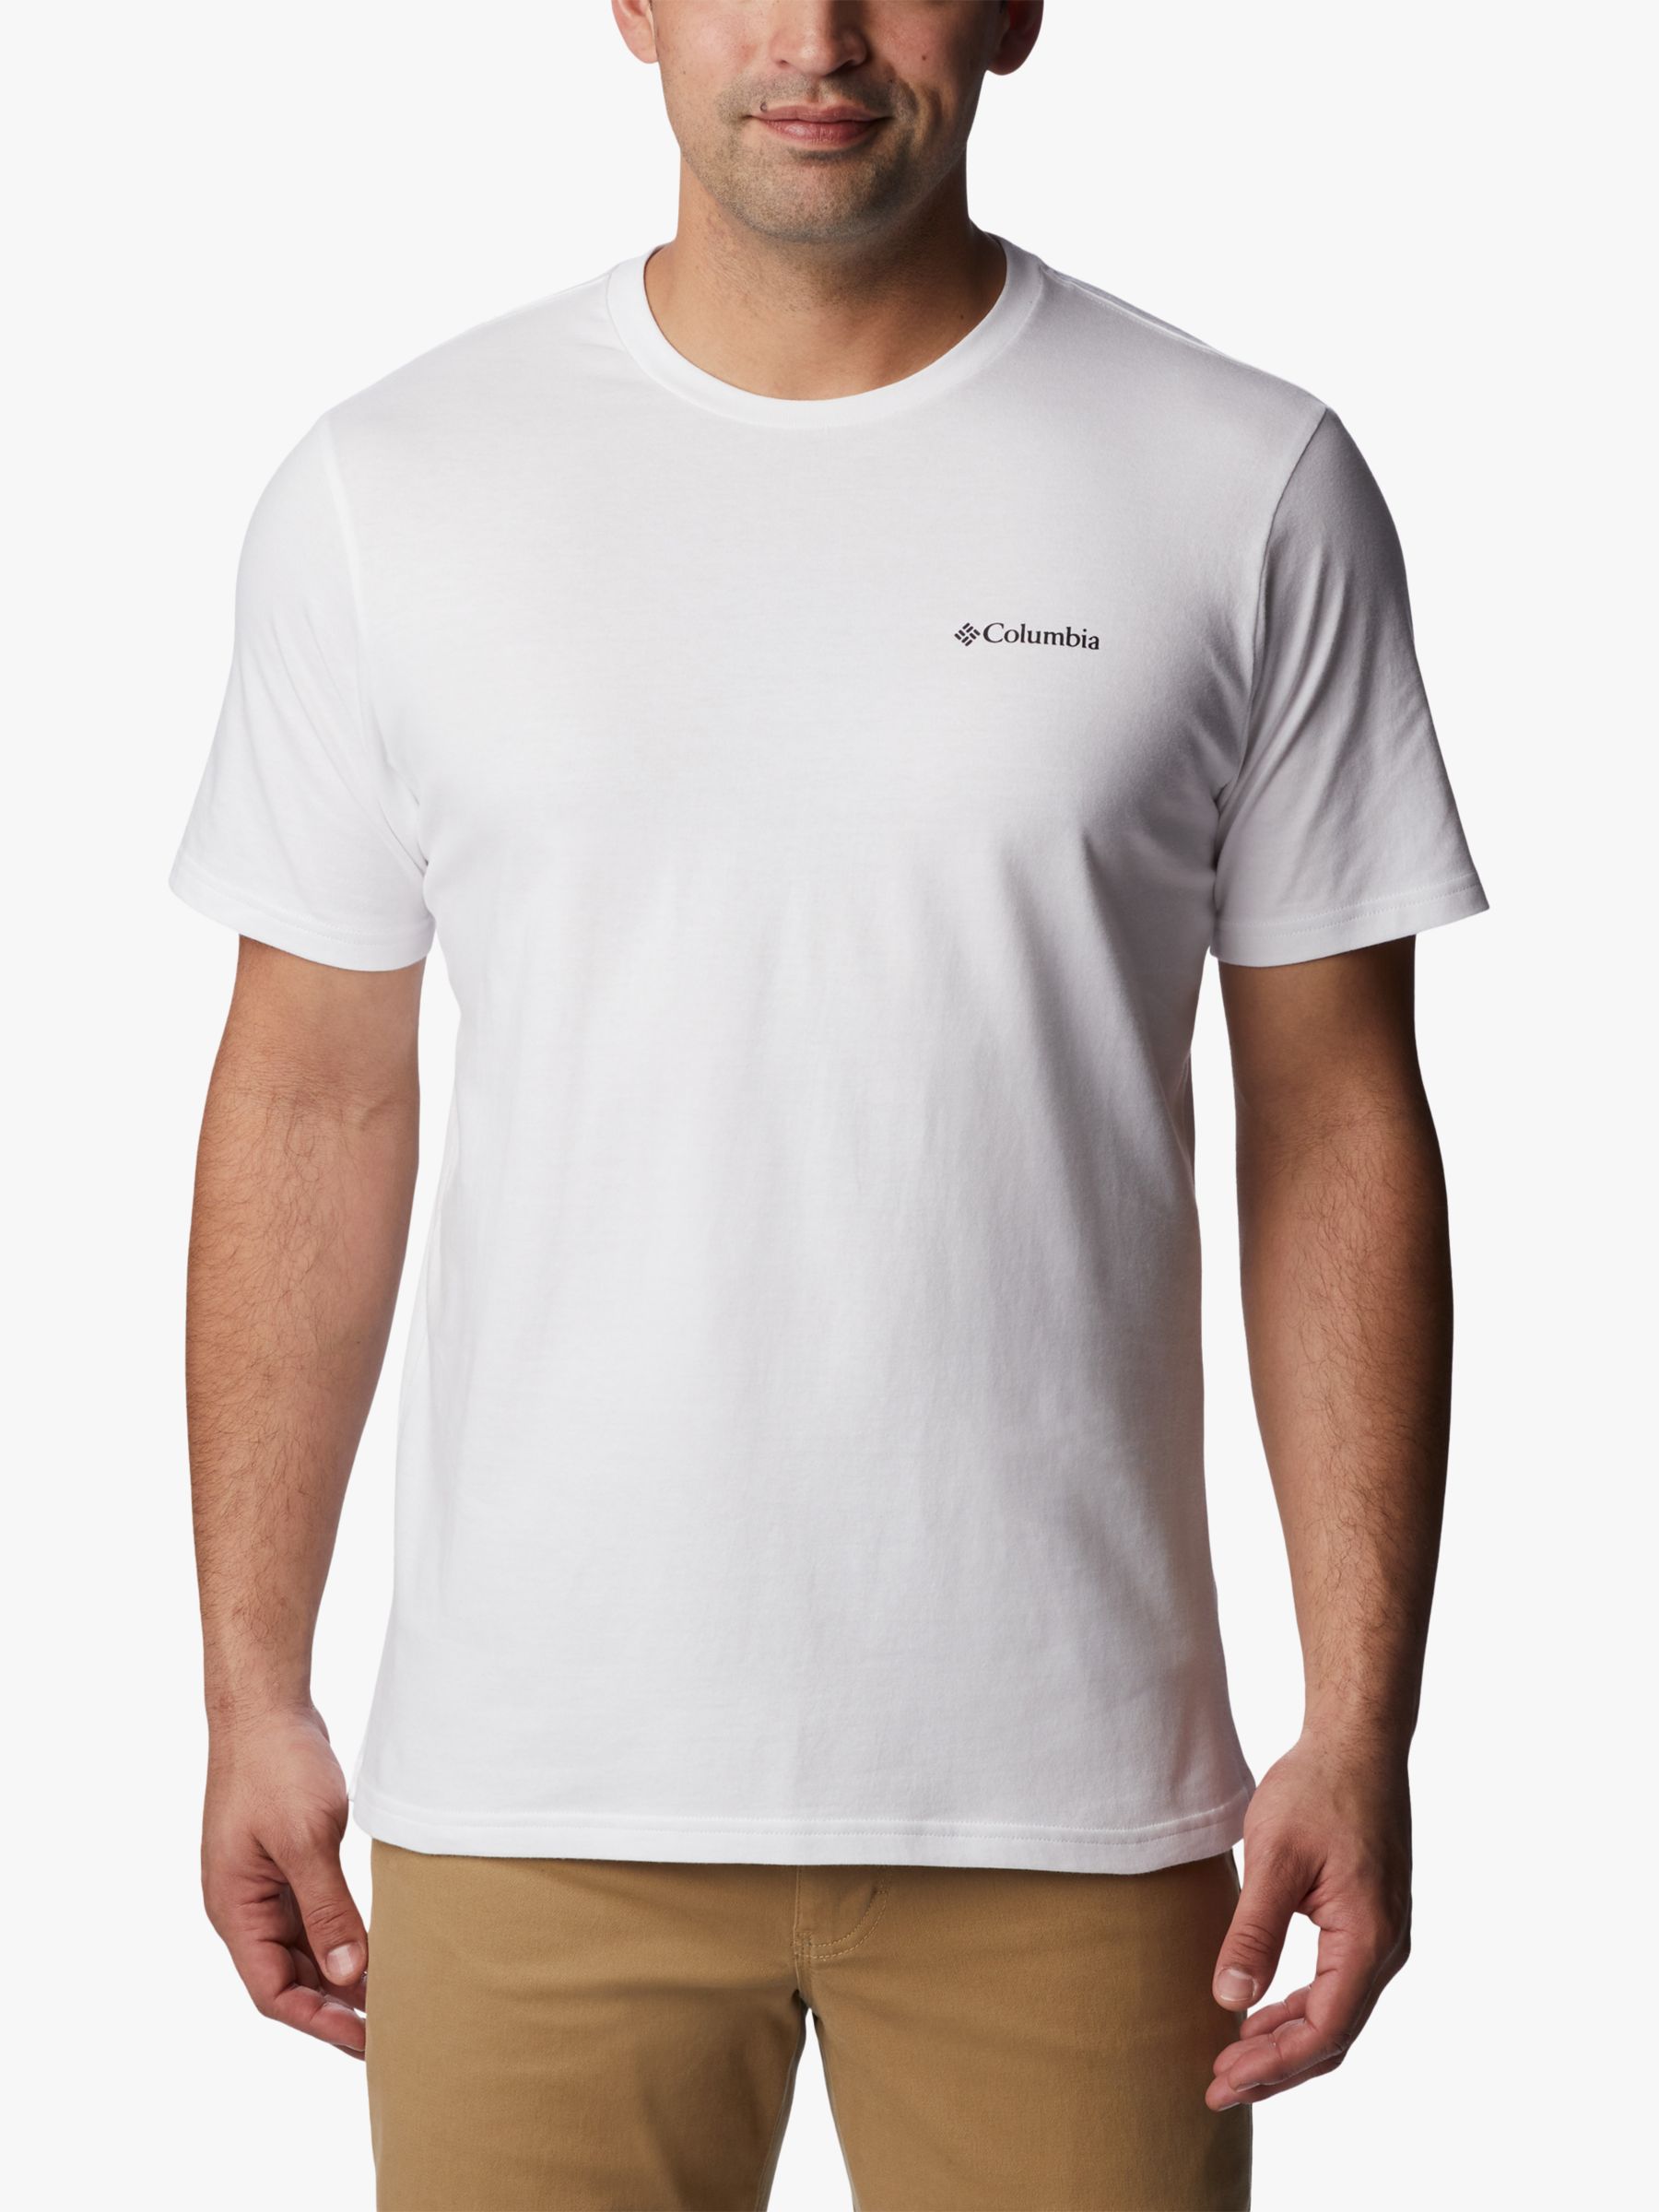 Columbia North Cascades Cotton T-shirt, White at John Lewis & Partners